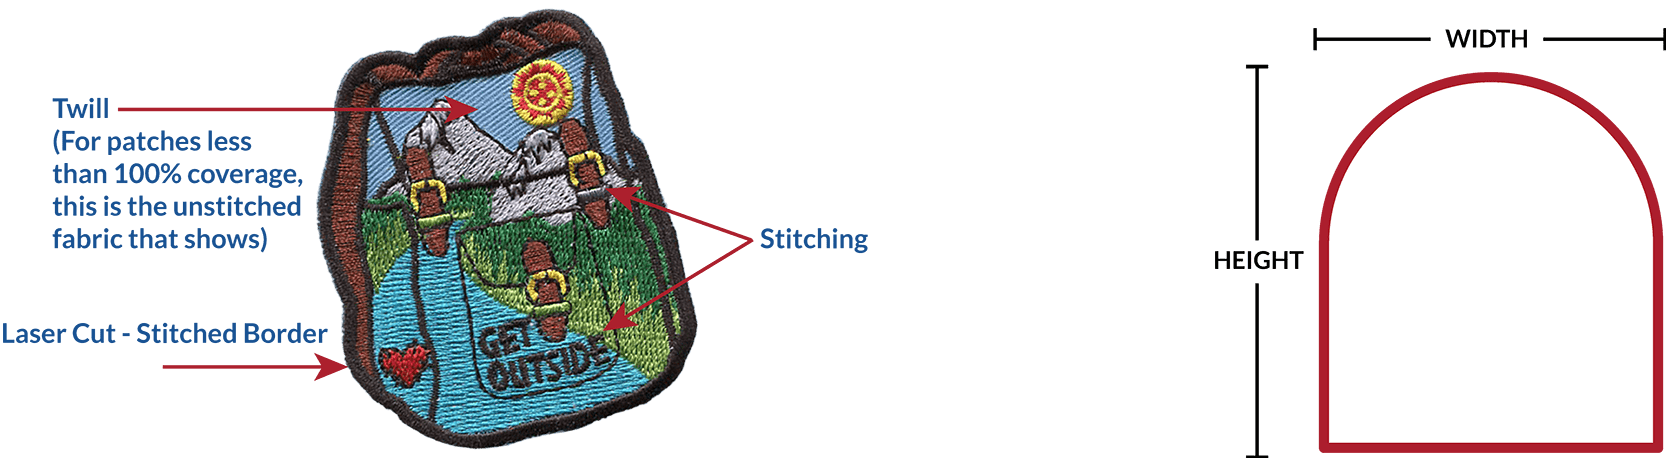 the diagram shows width and height and where twill and stitching are located